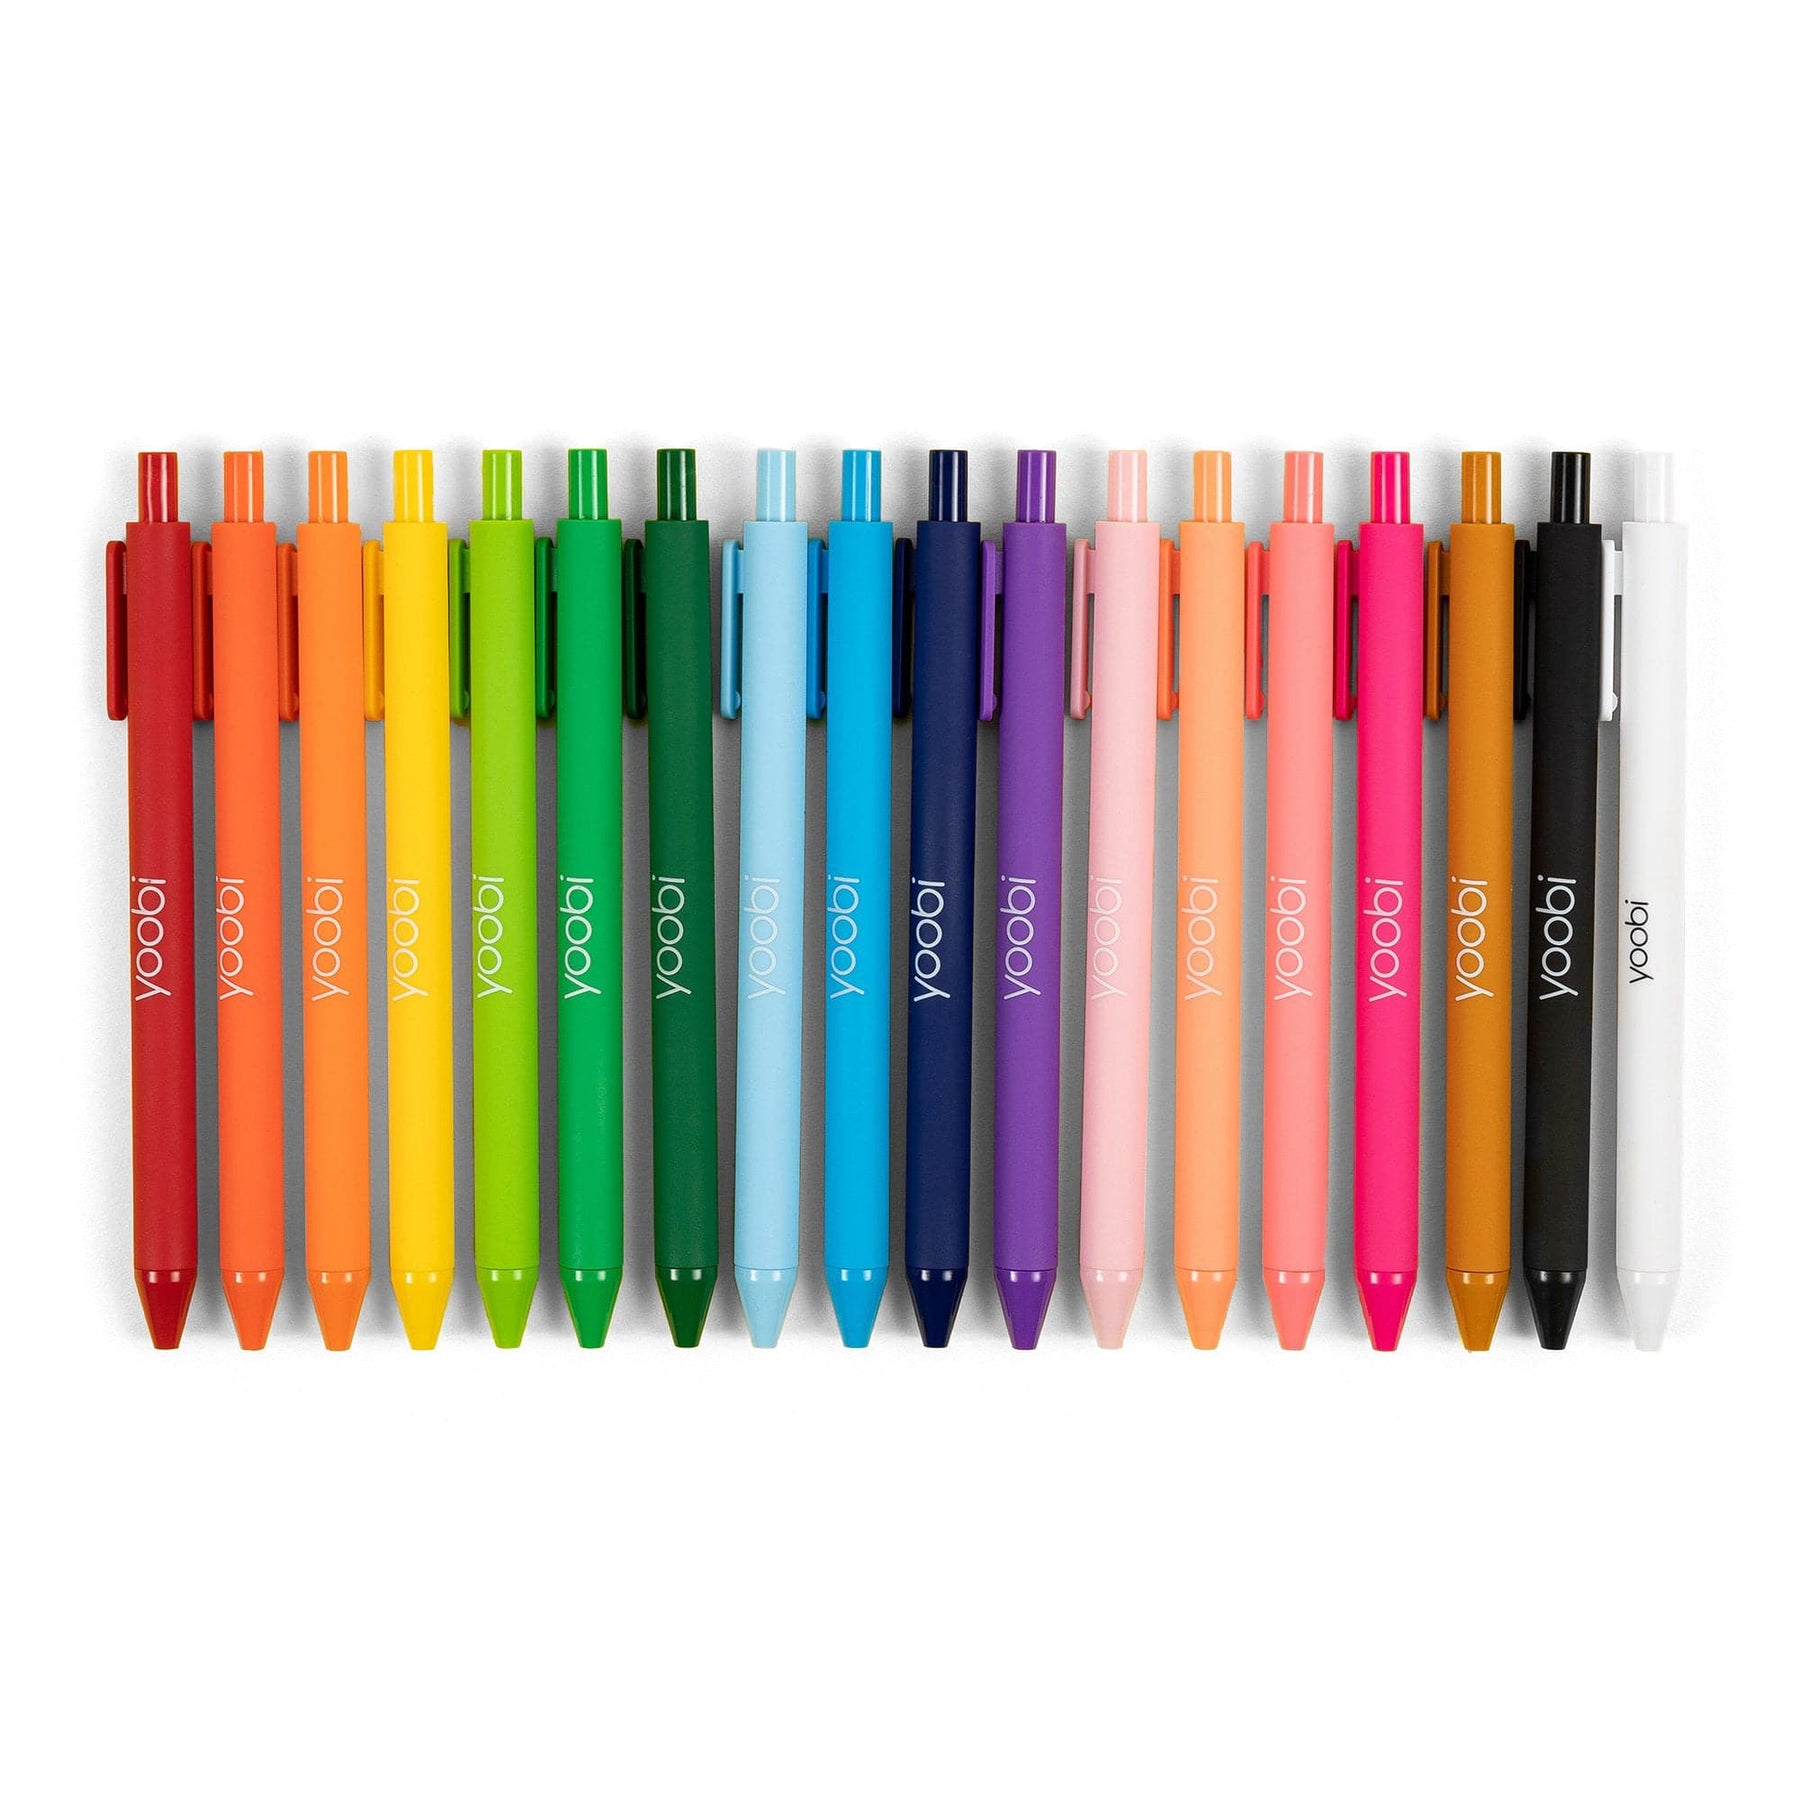 Ooly - Color Write Fountain Pens - Set of 8